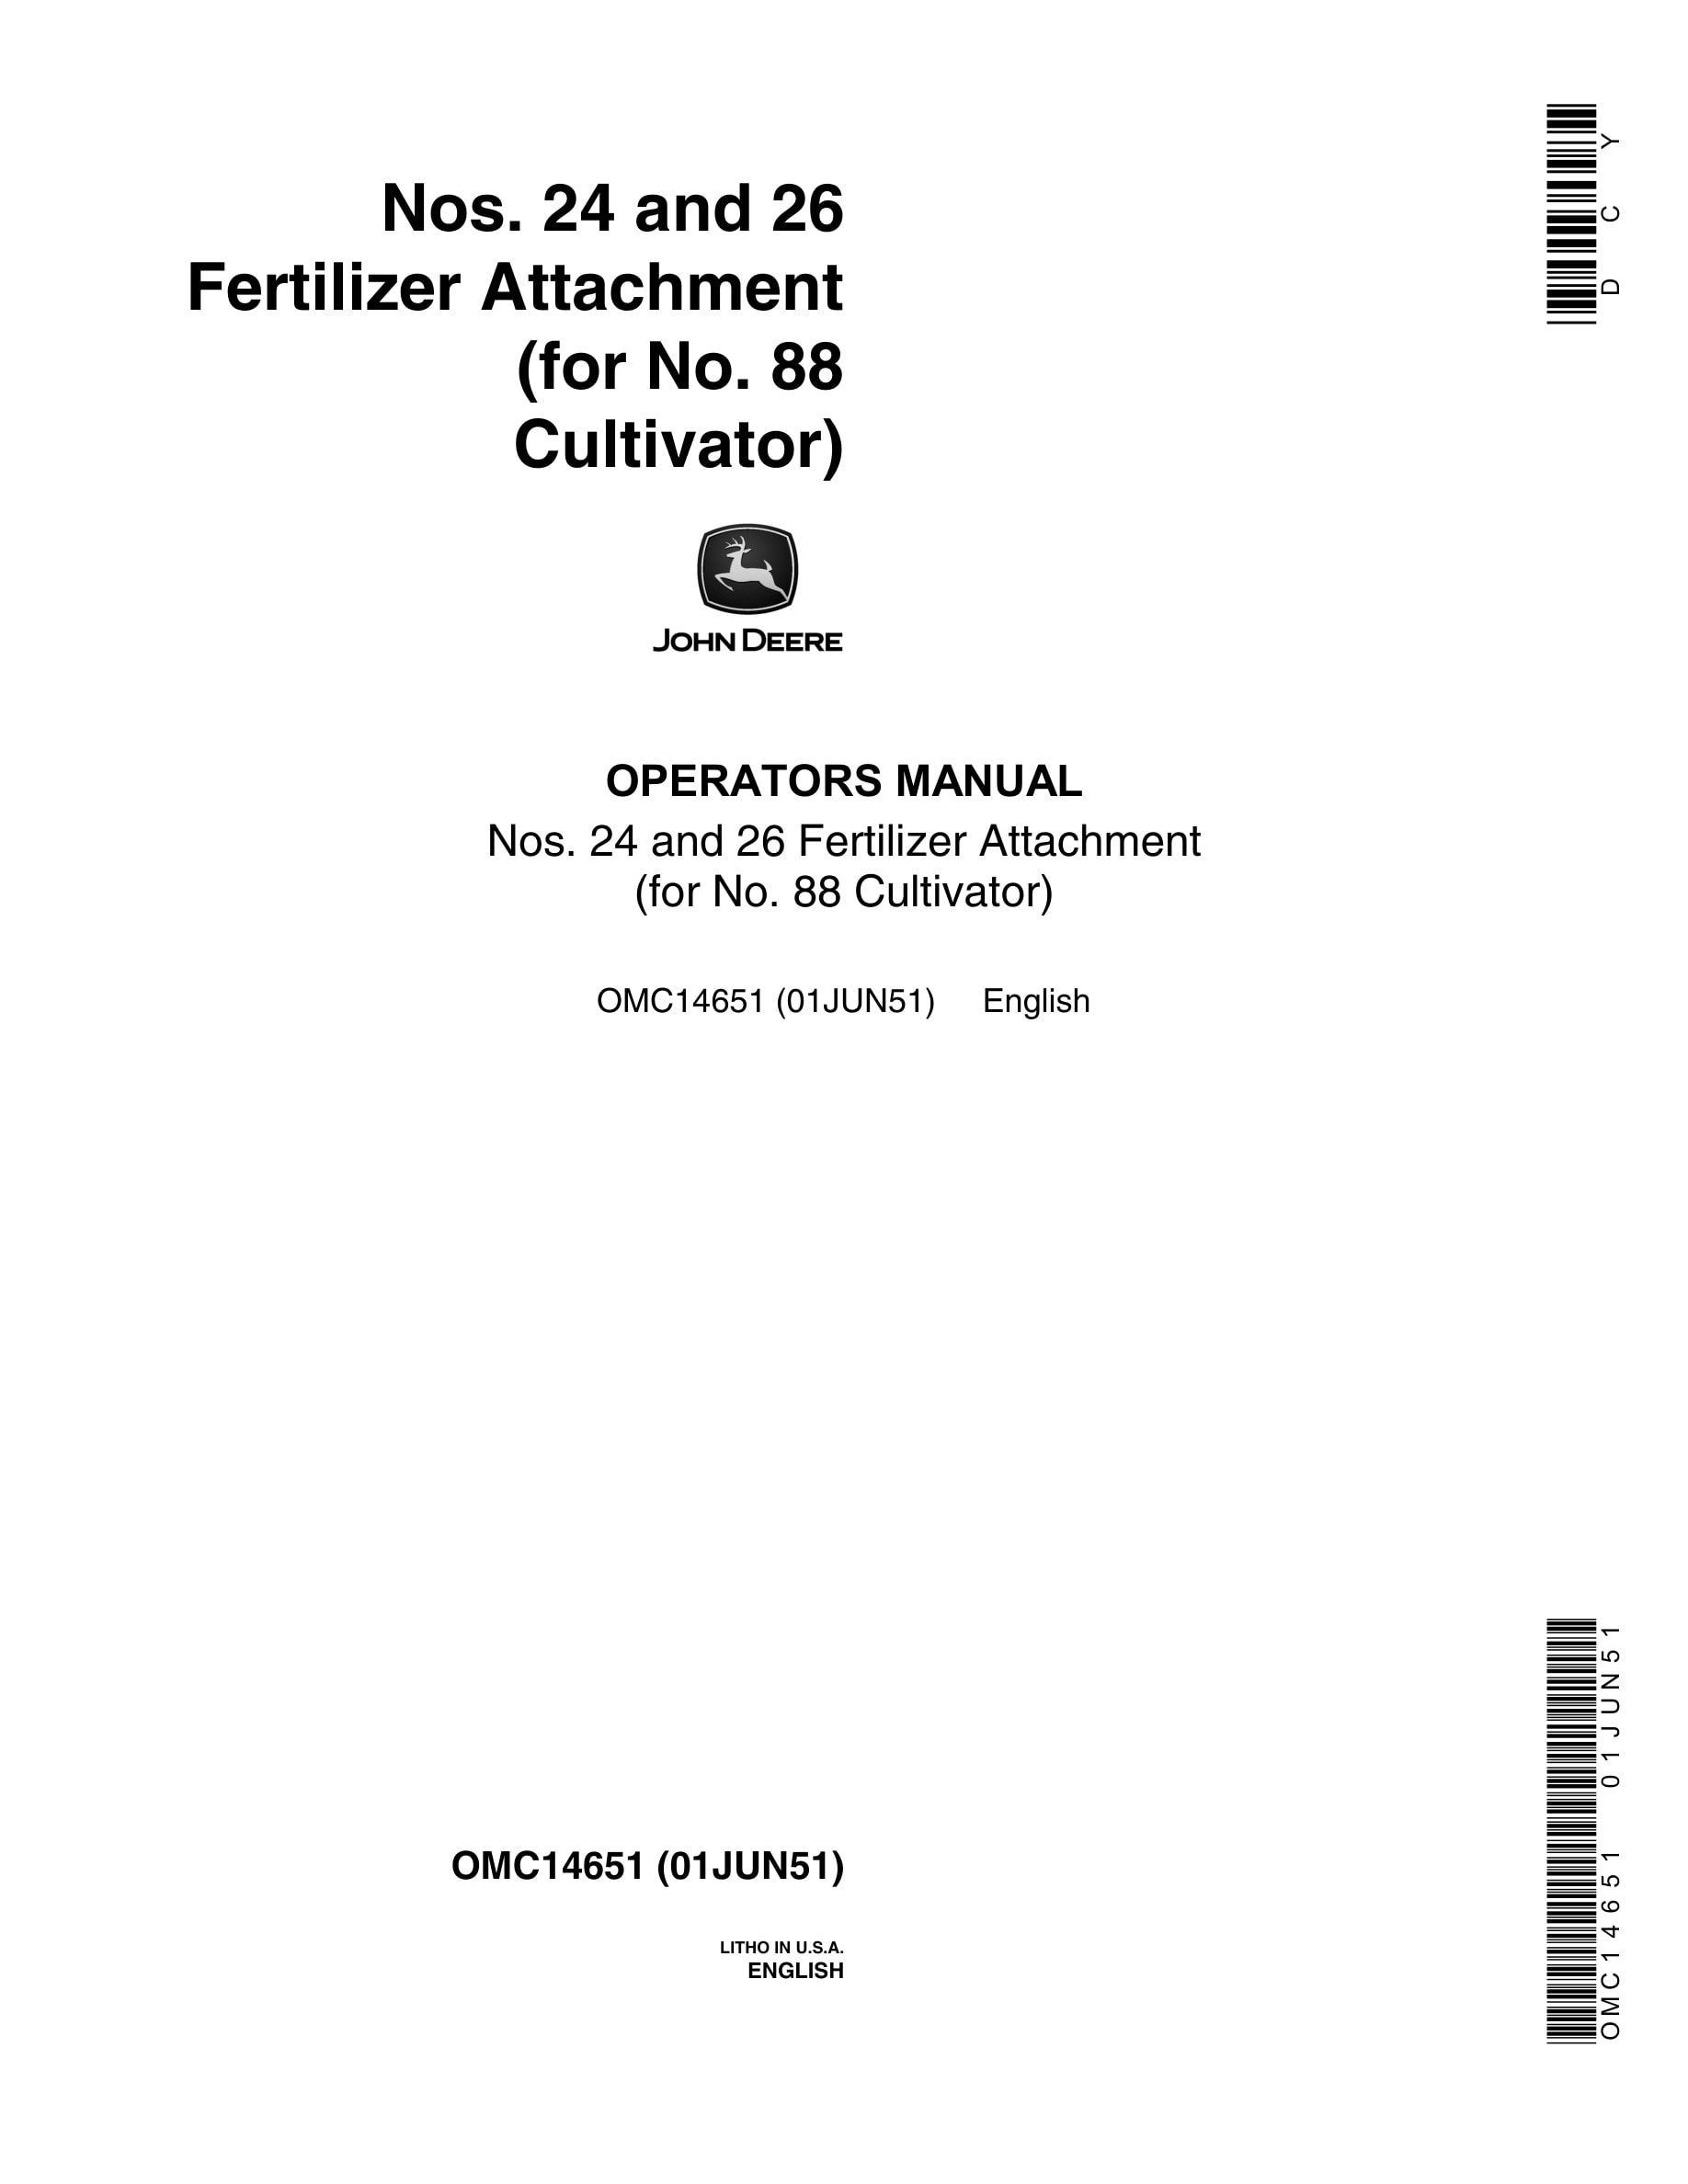 John Deere Nos.24 and 26 Fertilizer Attachment (for No. 88 Cultivator) Operator Manual OMD14651-1